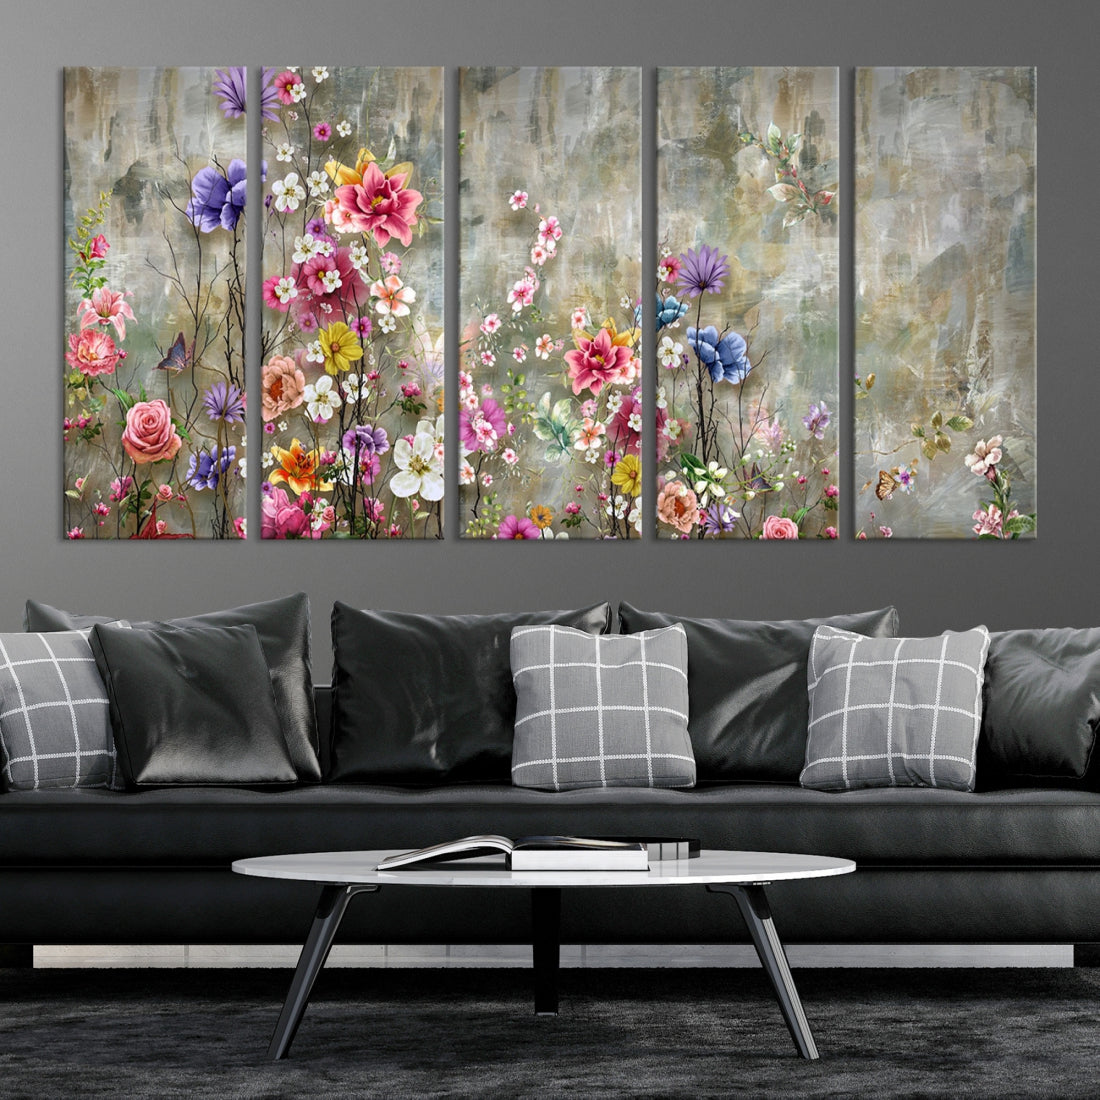 Cheering Flowers Painting on Canvas Print Extra Large Wall Art Floral Wall Decor